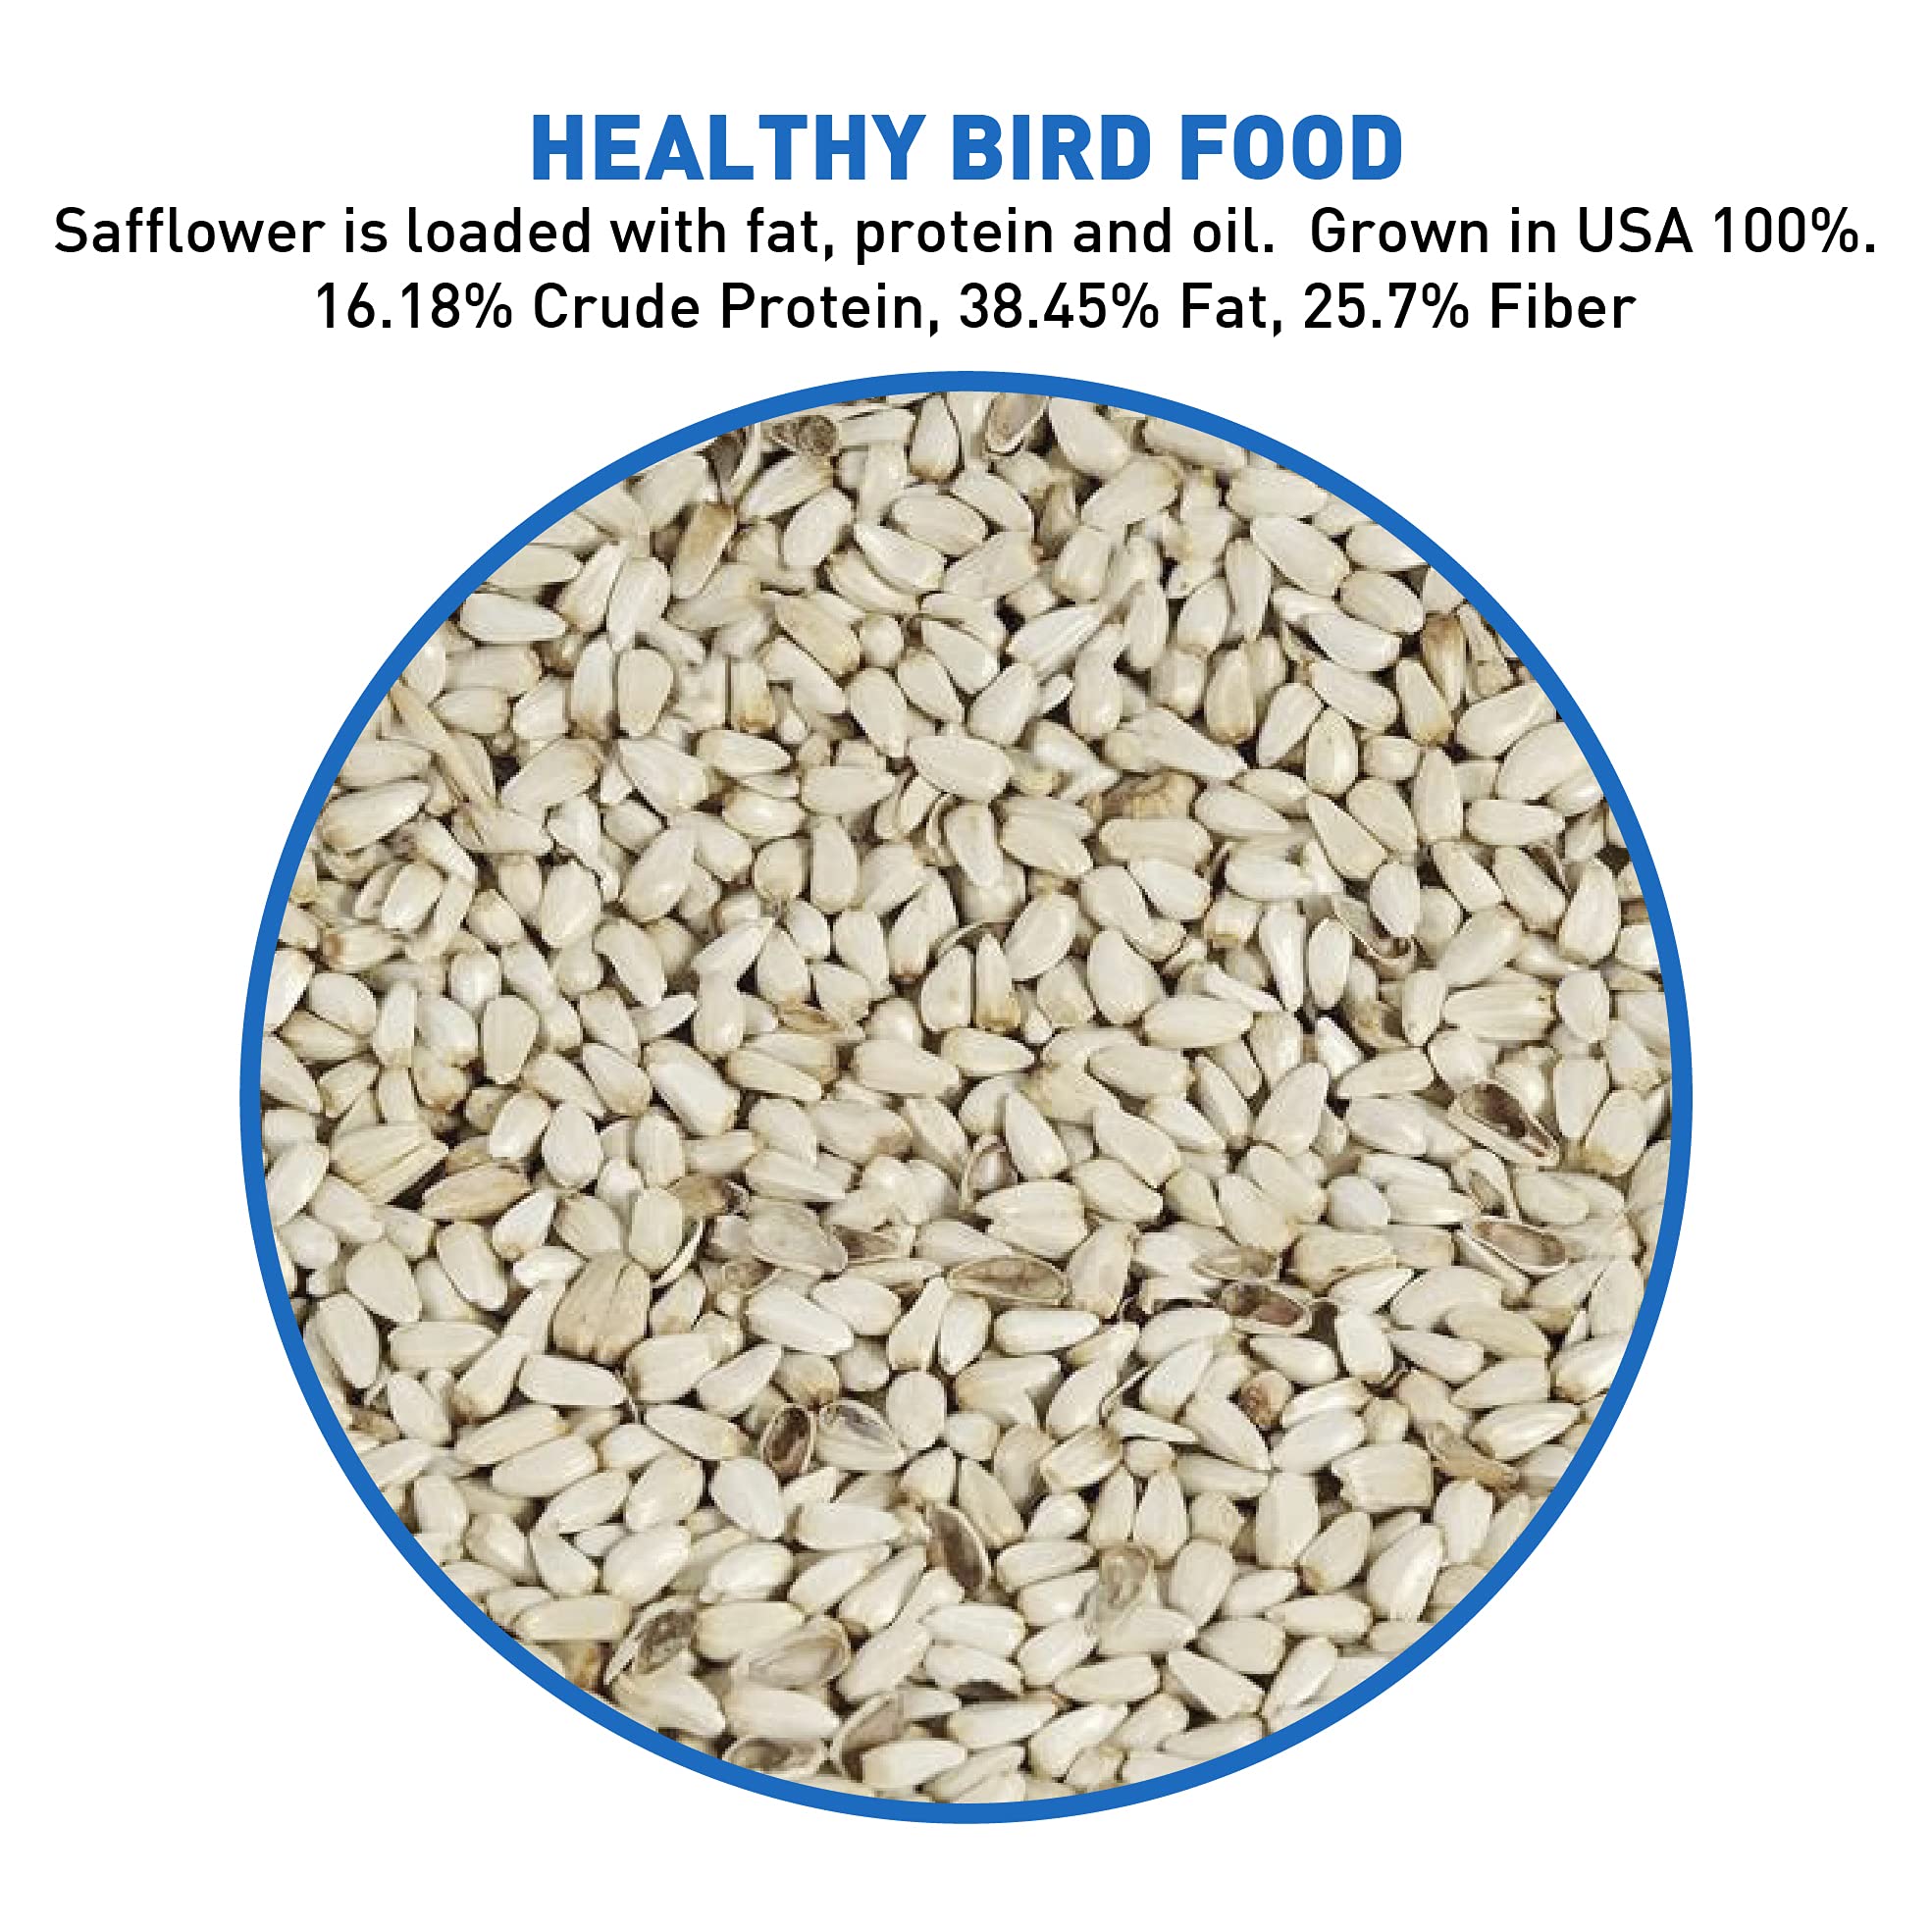 EasyGo Product Safflower Bird Seed Wild Bird Food – Great for Cardinals, Chickadees, Titmice, Doves, Woodpeckers and Grosbeaks – 50 Pounds, White (Model: Safflower-50)